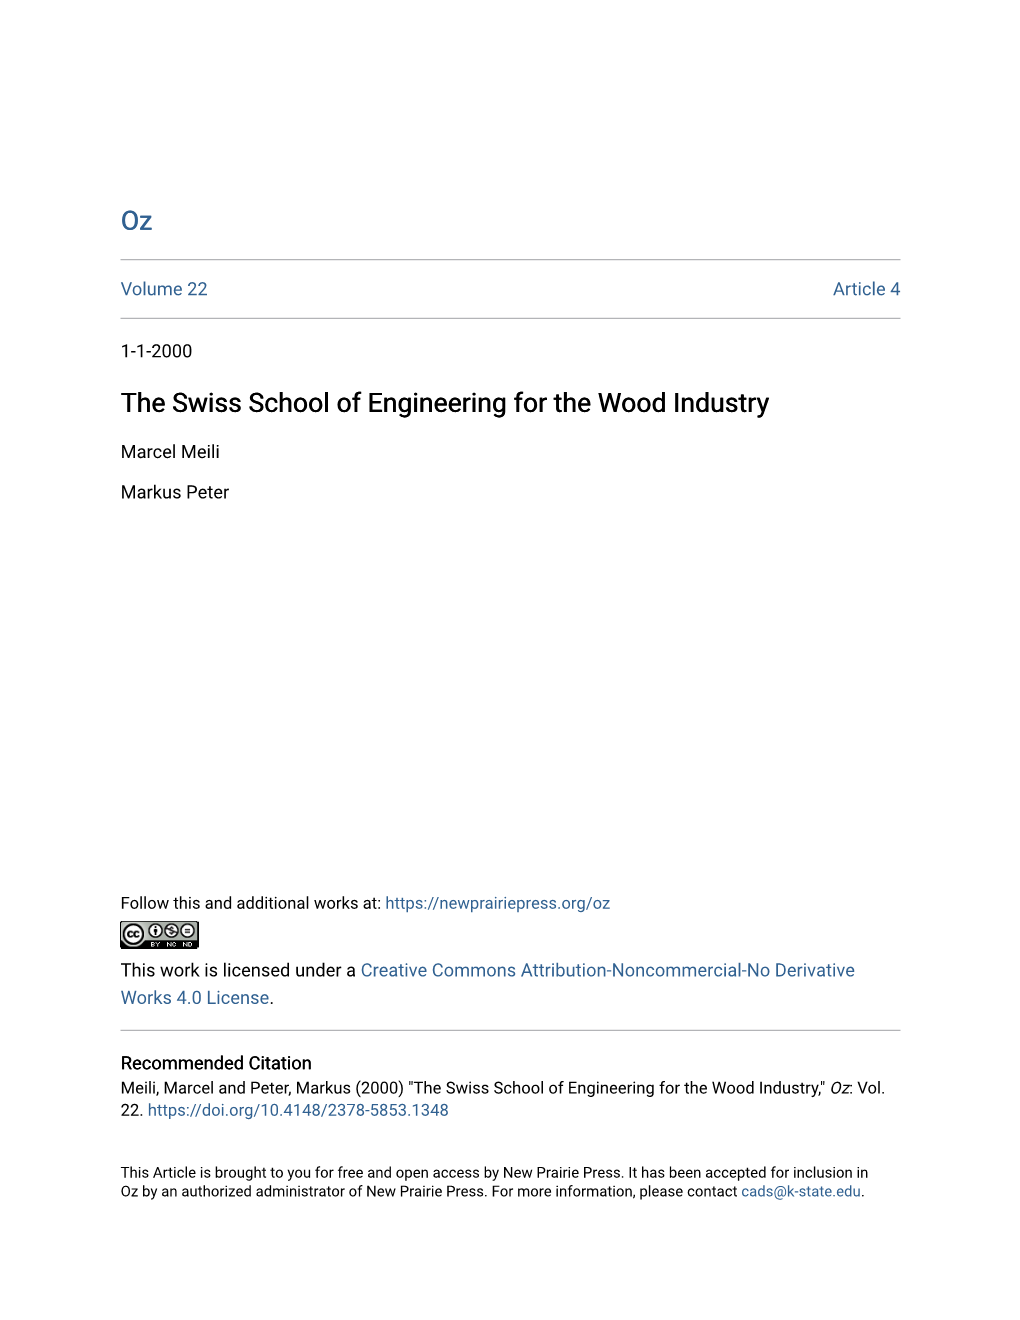 The Swiss School of Engineering for the Wood Industry